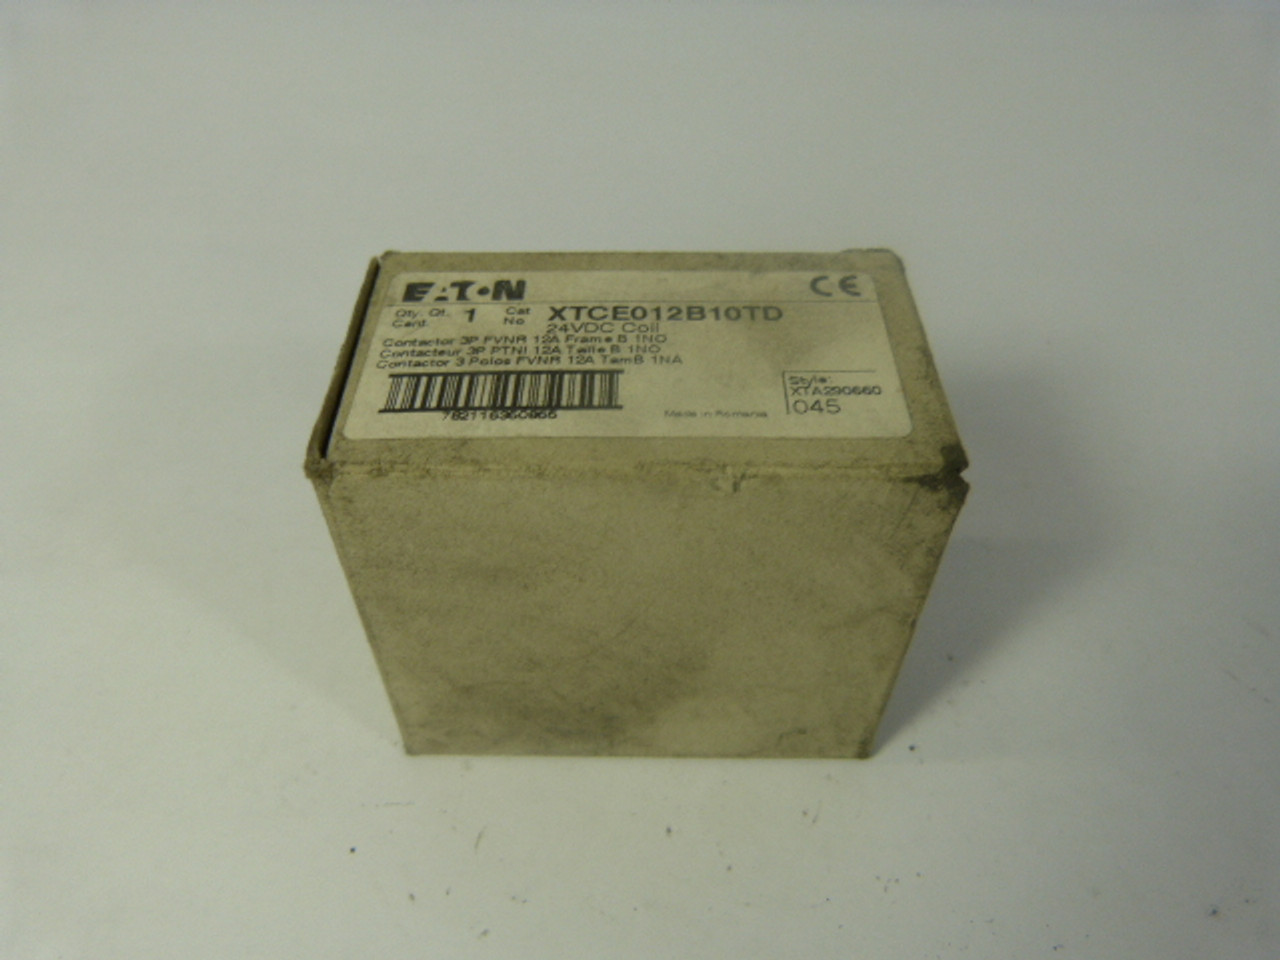 Eaton XTCE-012B10TD Contactor 3Pole 12A 24VDC ! NEW !